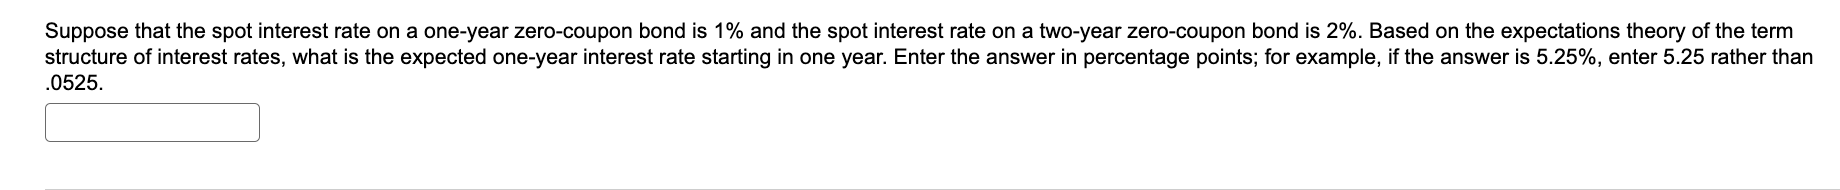 Suppose that the spot interest rate on a one-year zero-coupon bond is 1% and the spot interest rate on a